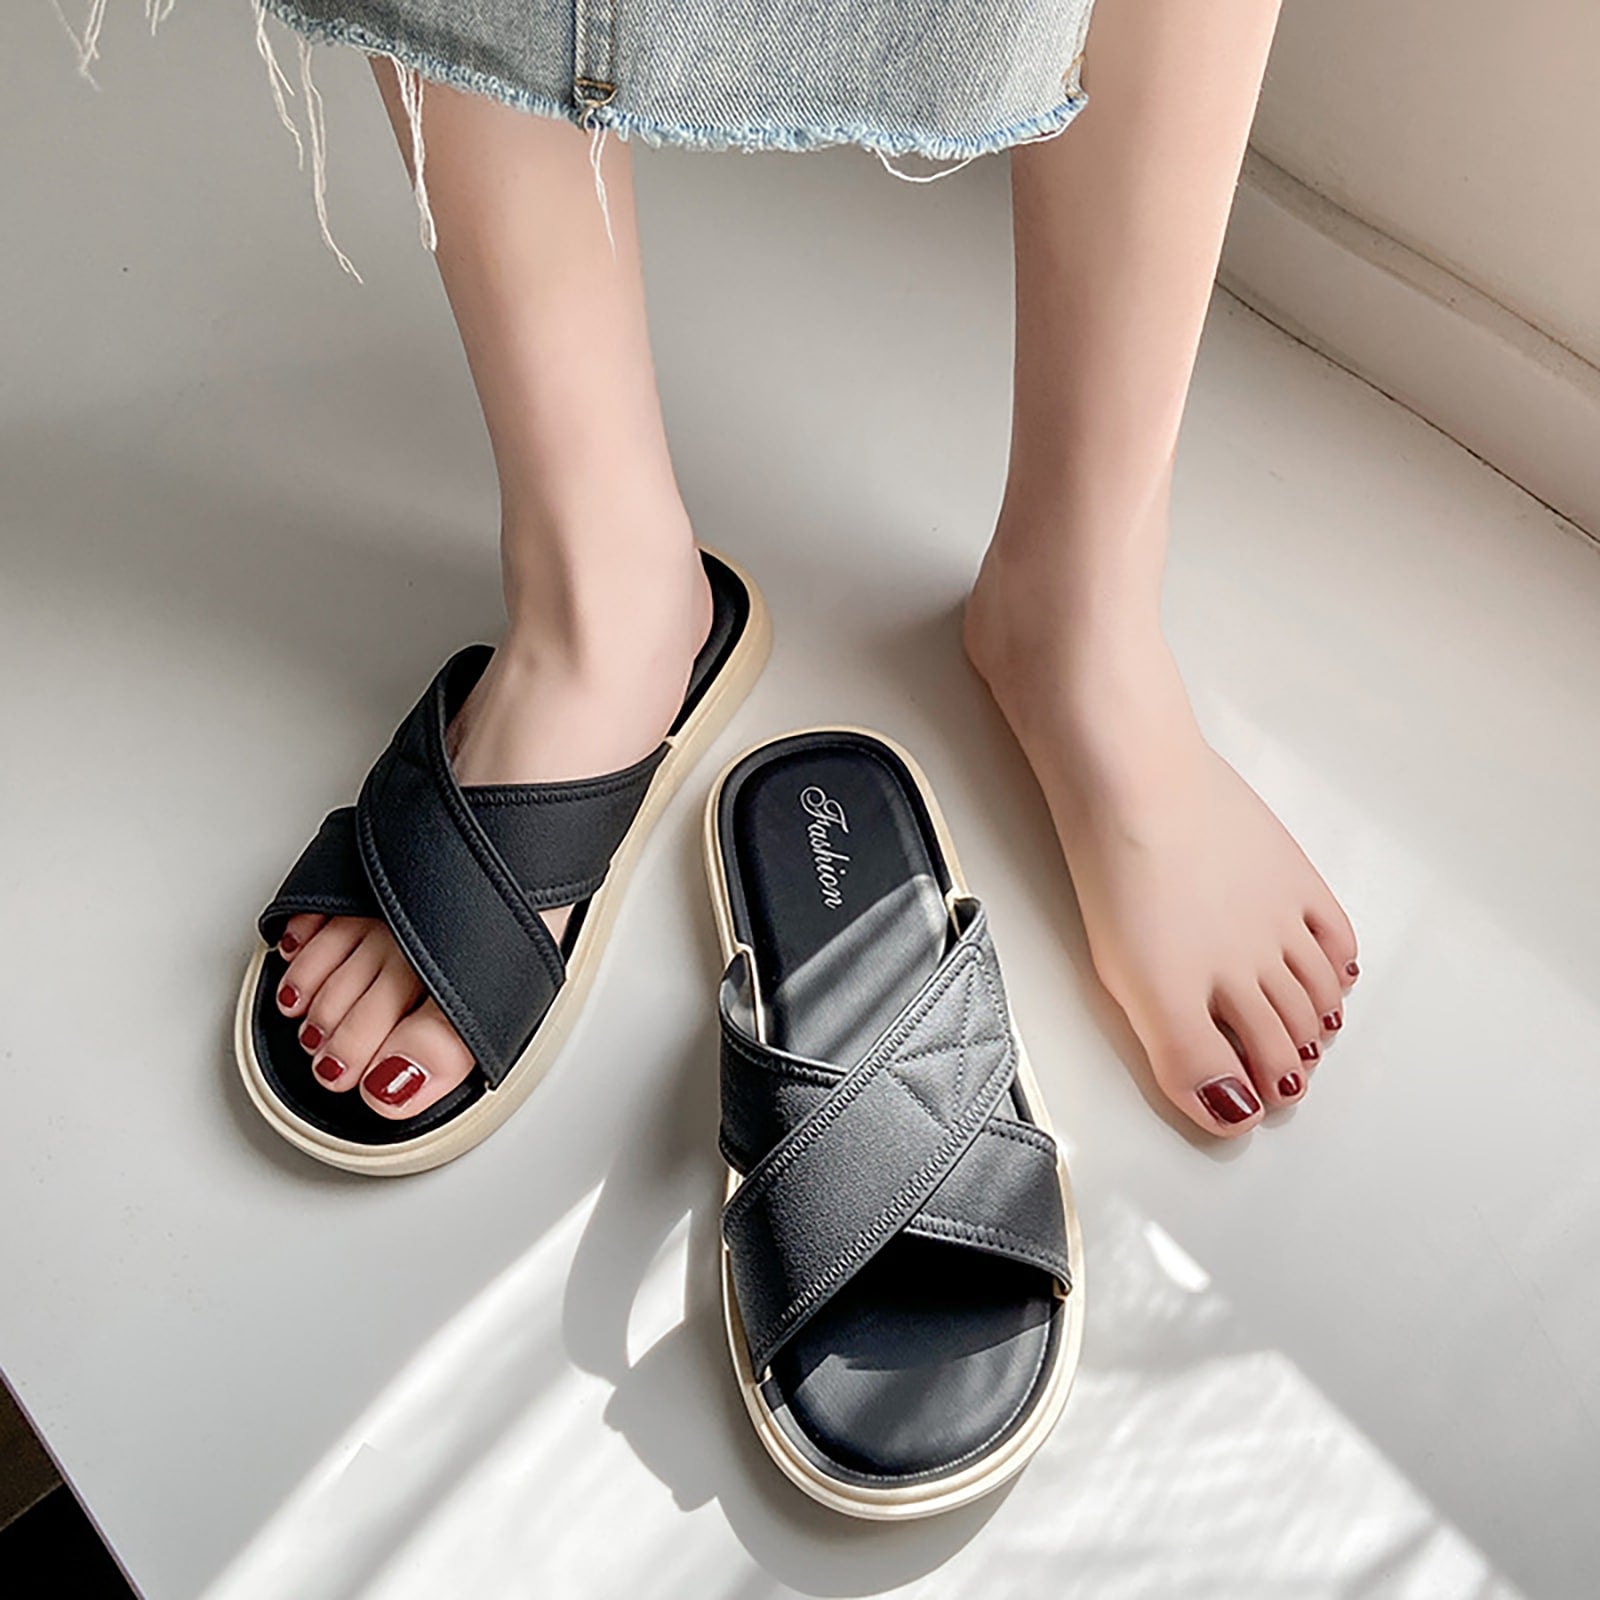 New Arrival Fashionable Simple Elegant Slippers For Home, Bathroom And Outdoor With Soft Pvc Slip-Resistant Bottom, Suitable For Indoor And Outdoor Wear, Fashion Style-Black-9